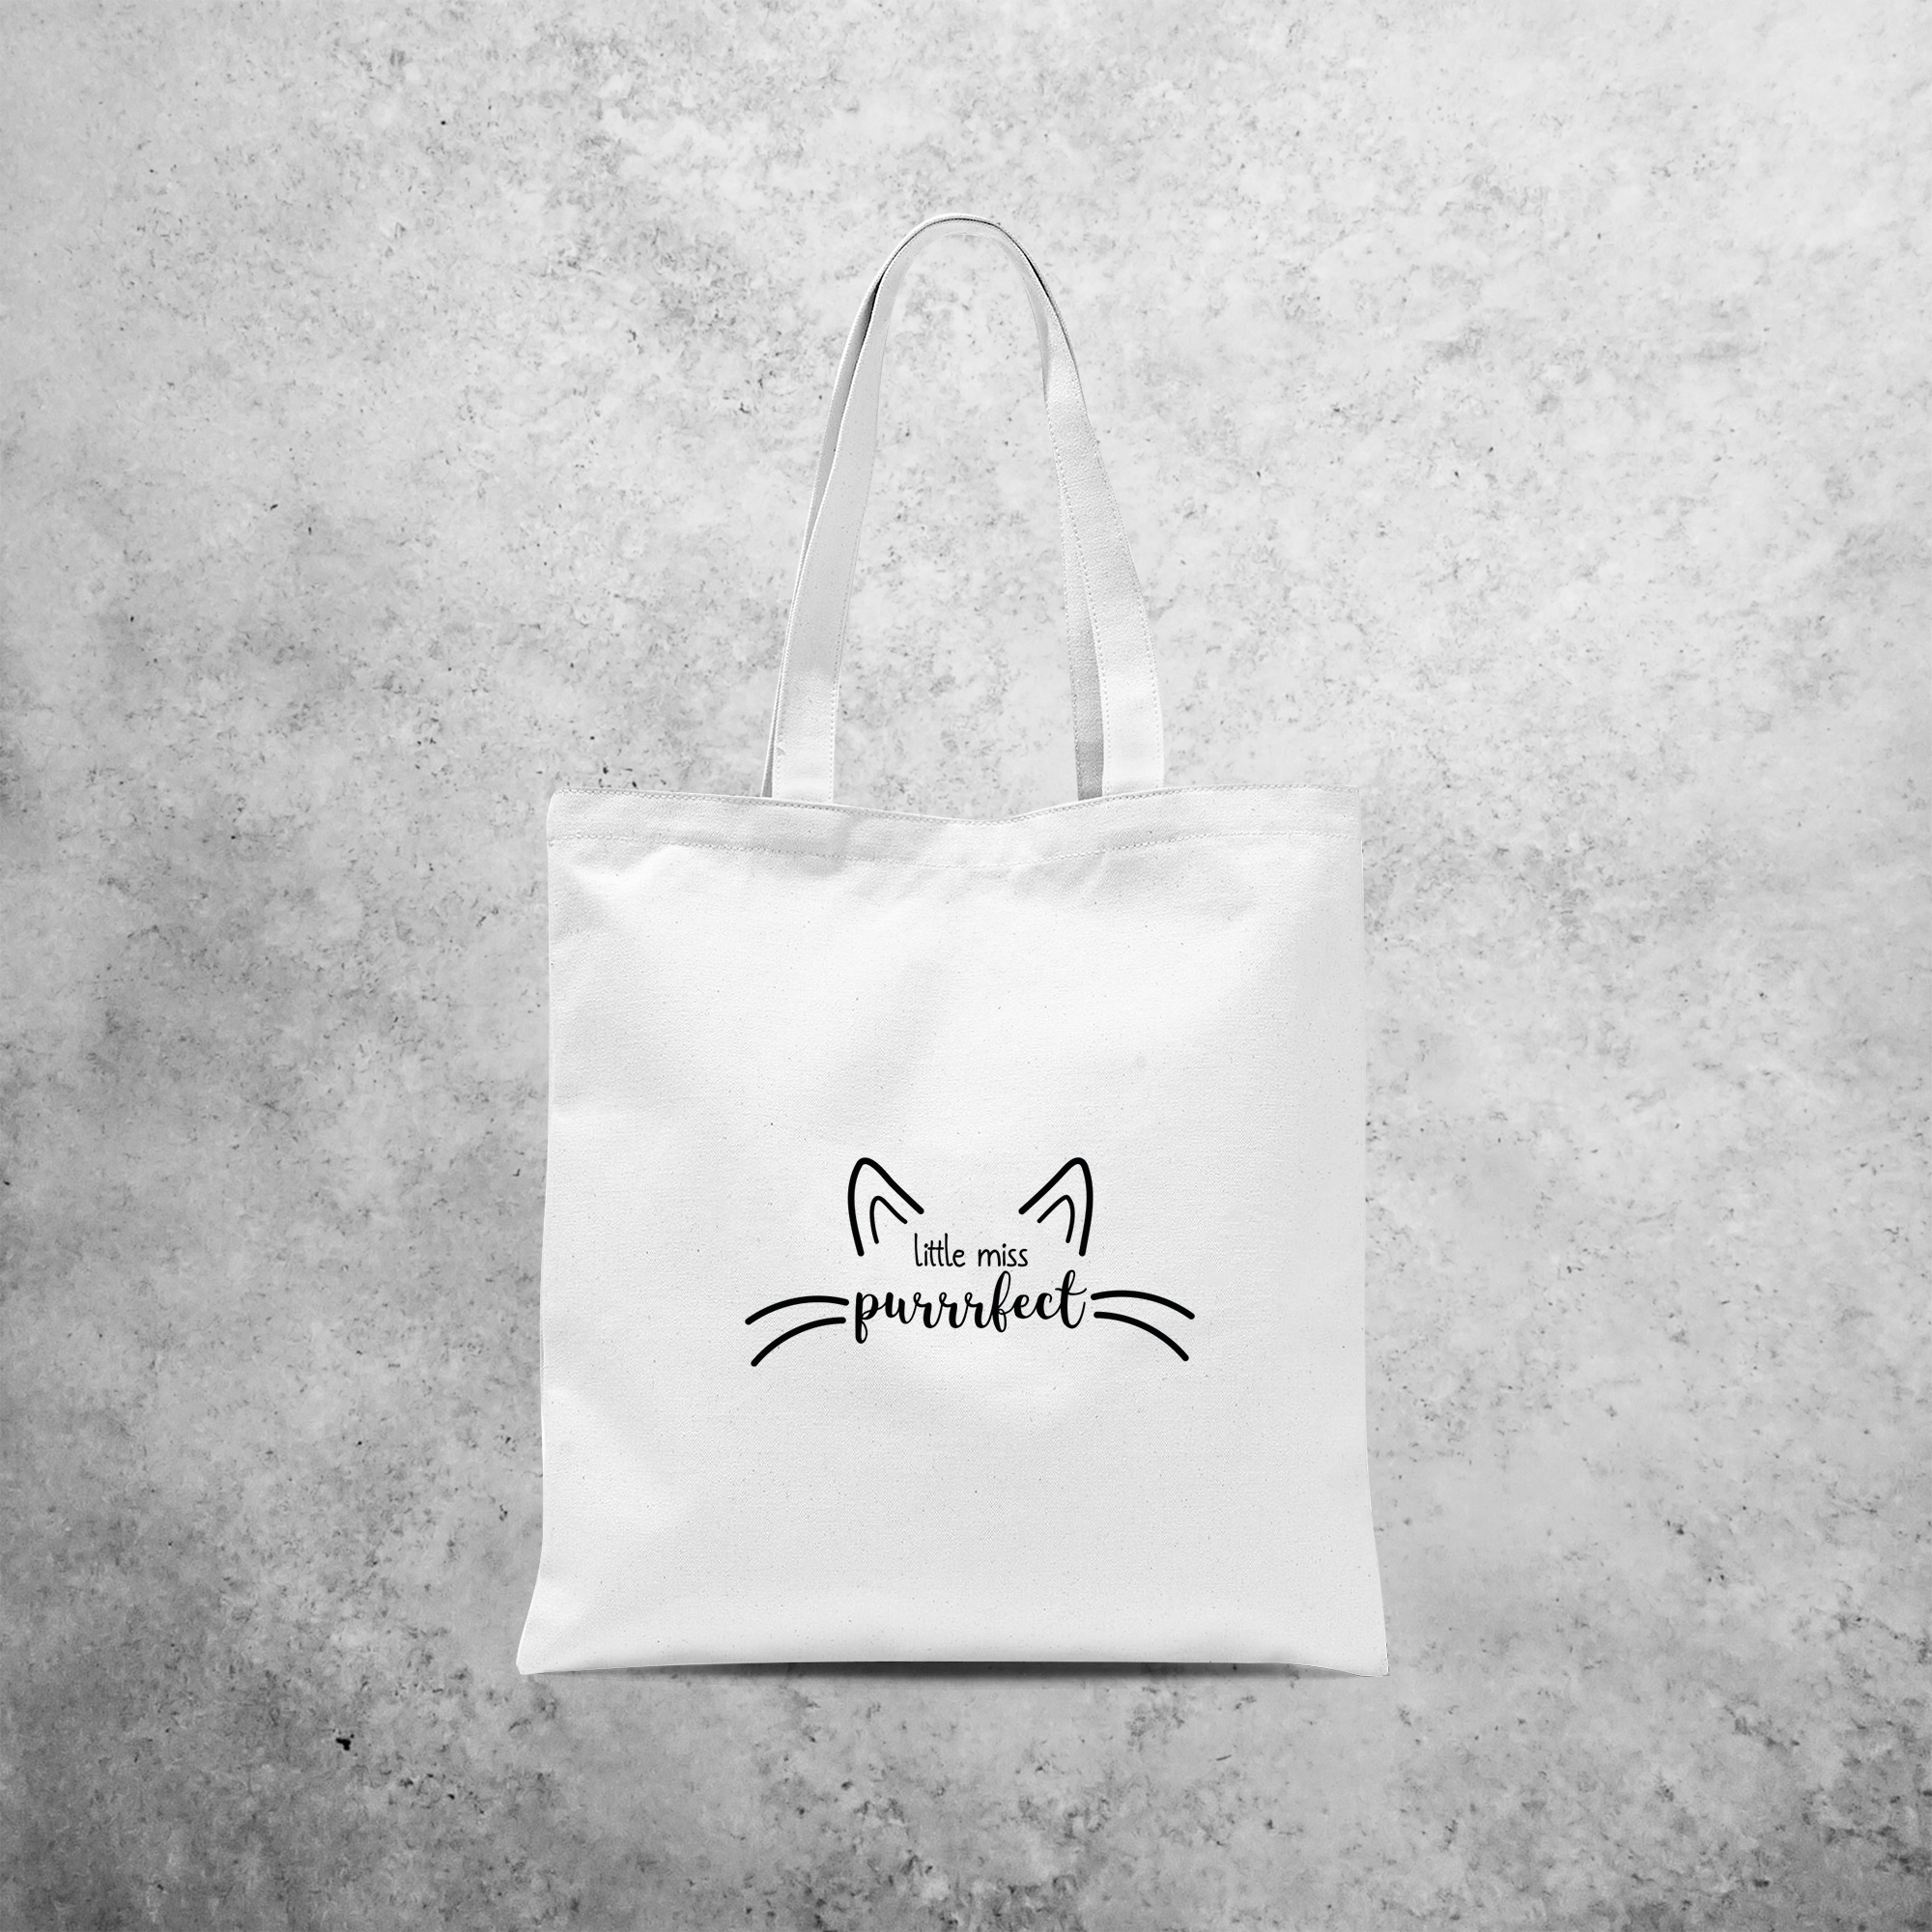 'Little miss  purrrfect' tote bag